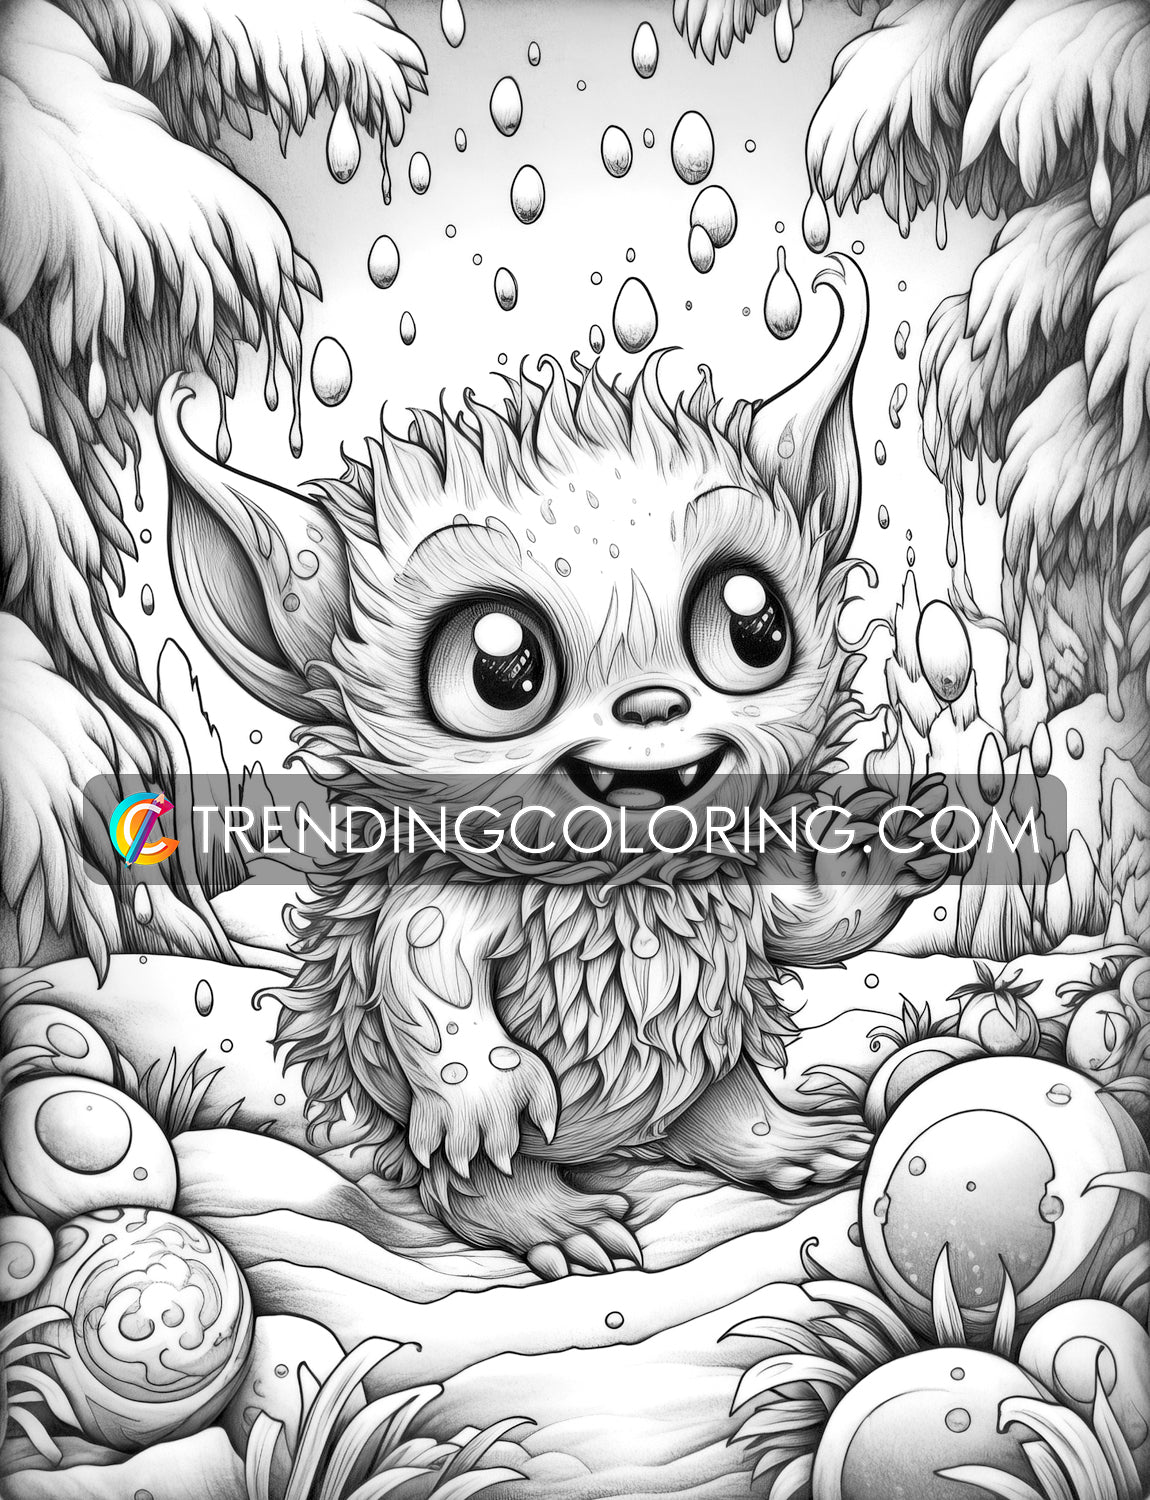 25 Adorable Creepy Monsters Grayscale Coloring Pages - Instant Download - Printable PDF